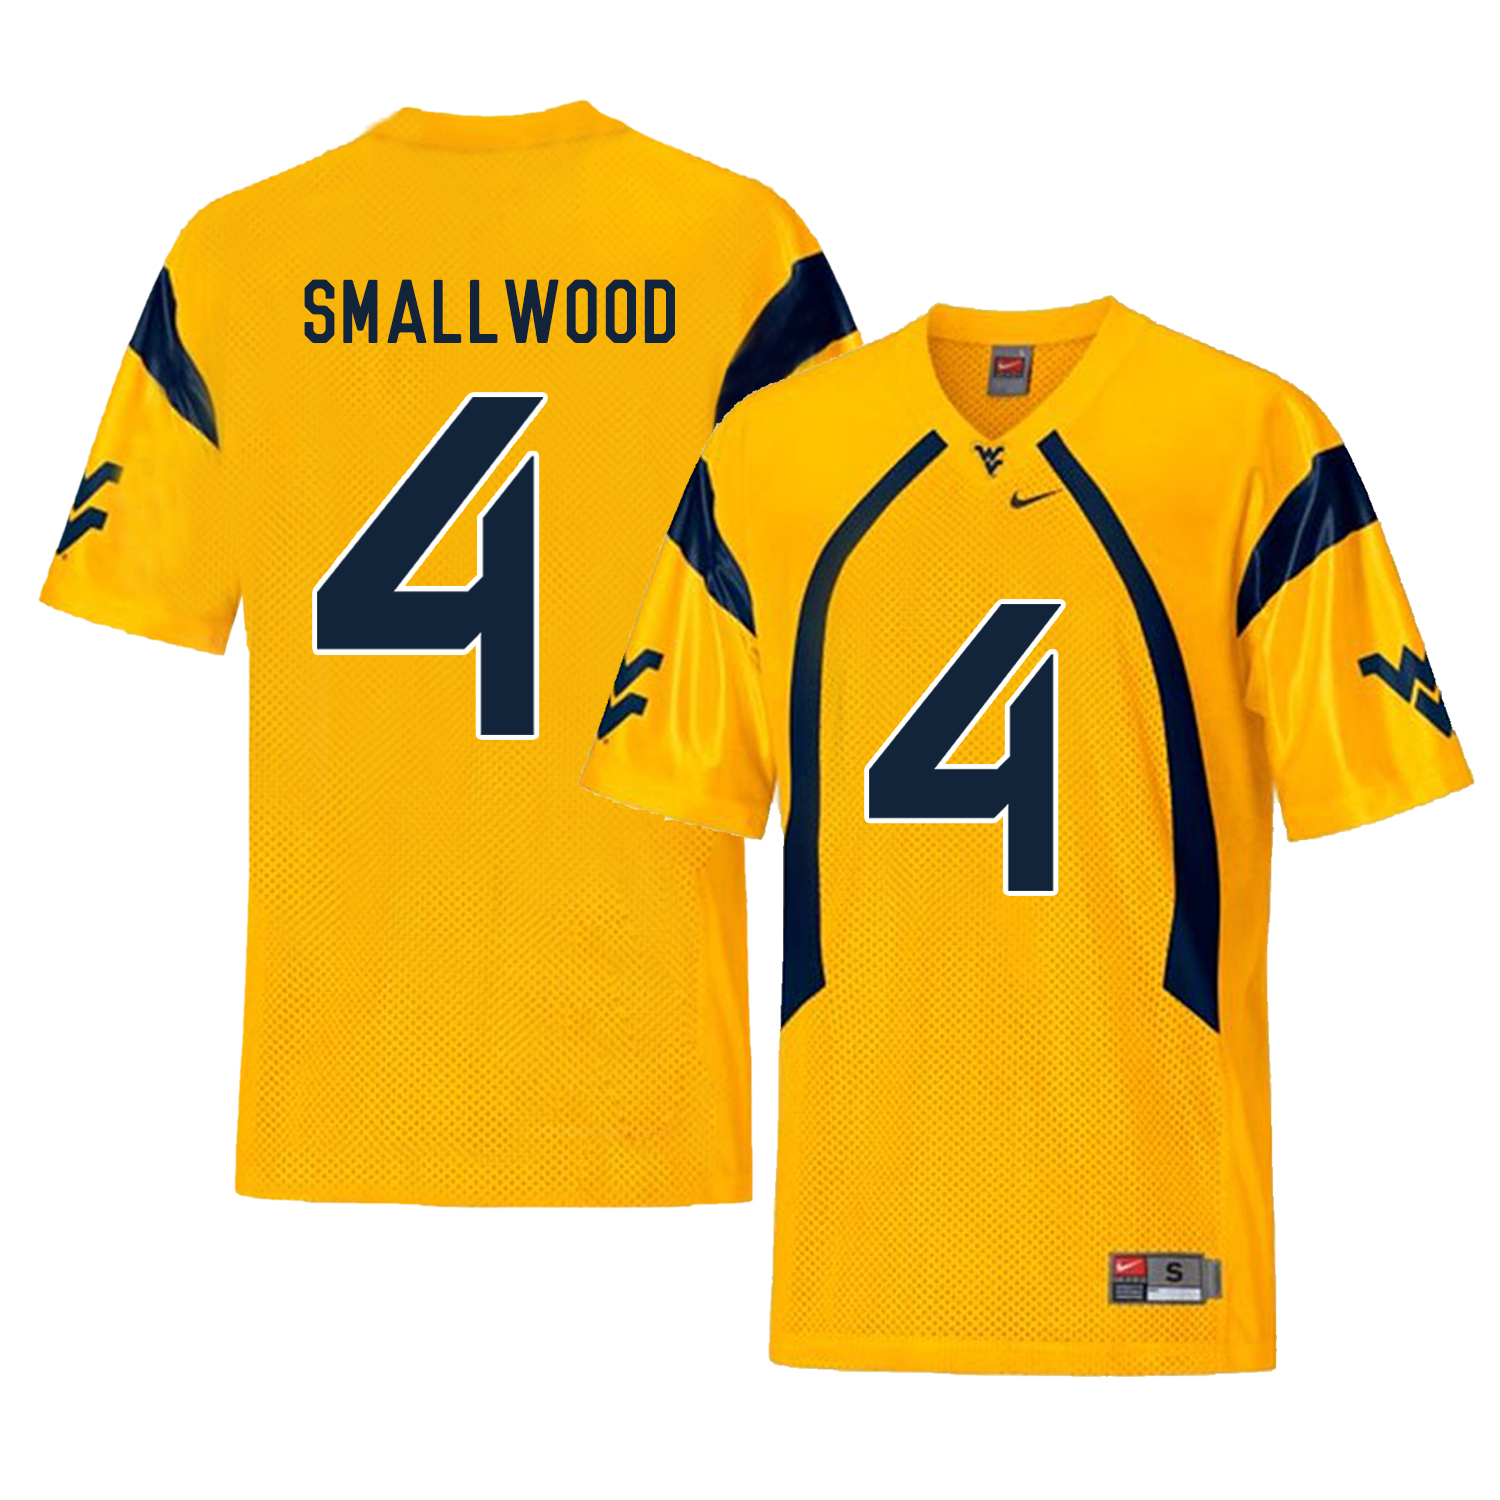 West Virginia Mountaineers 4 Wendell Smallwood Gold College Football Jersey